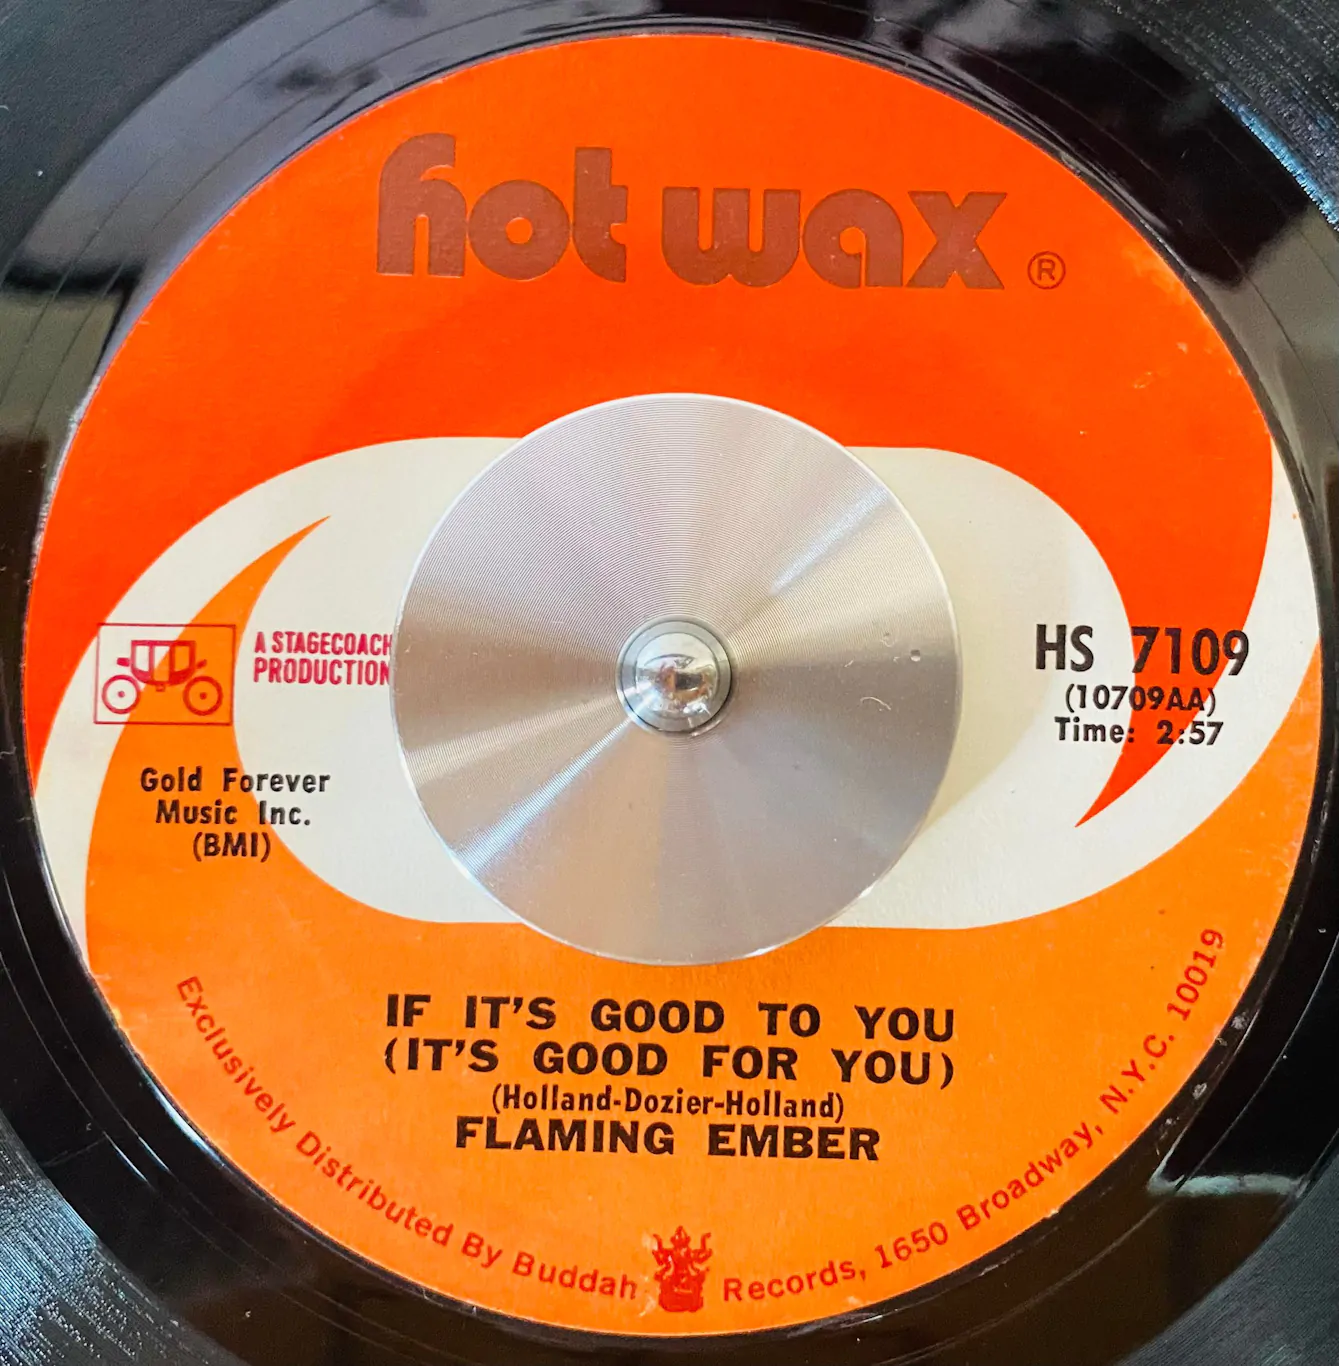 ON THE TURNTABLE: Flaming Ember – If It’s Good To You (It’s Good For You)